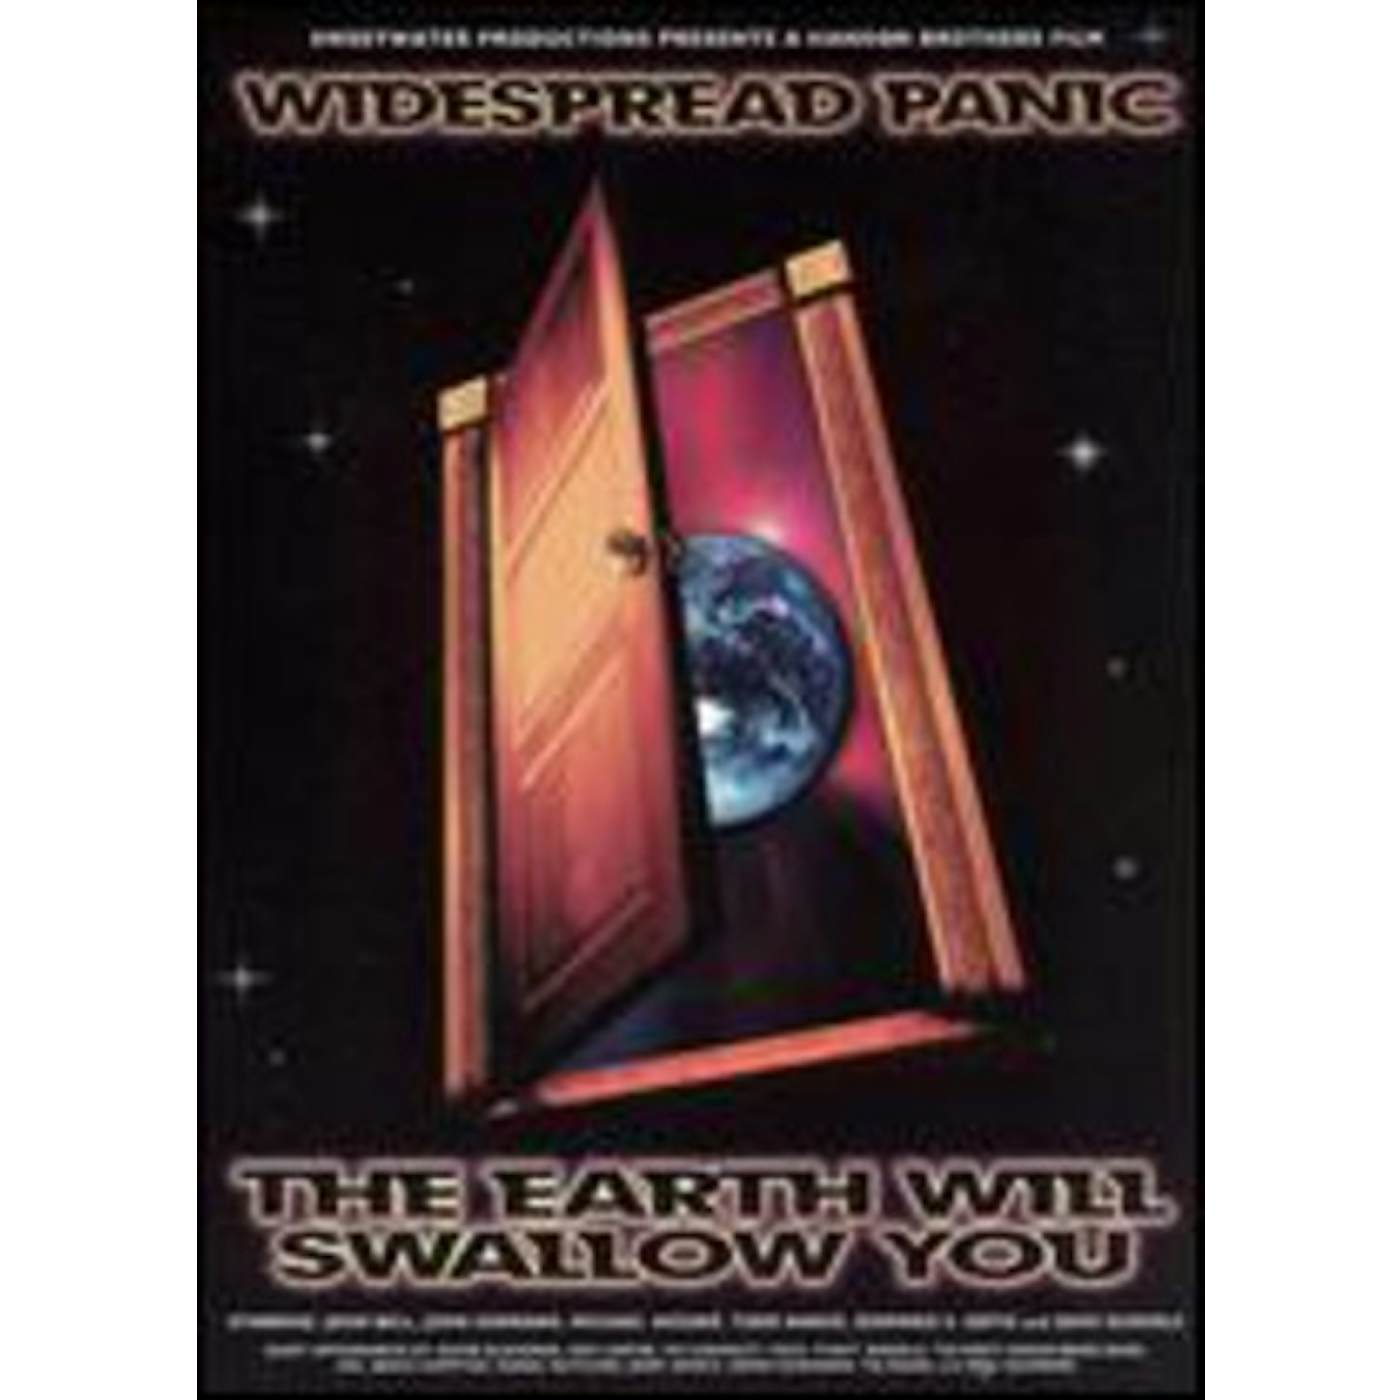 Widespread Panic EARTH WILL SWALLOW YOU DVD